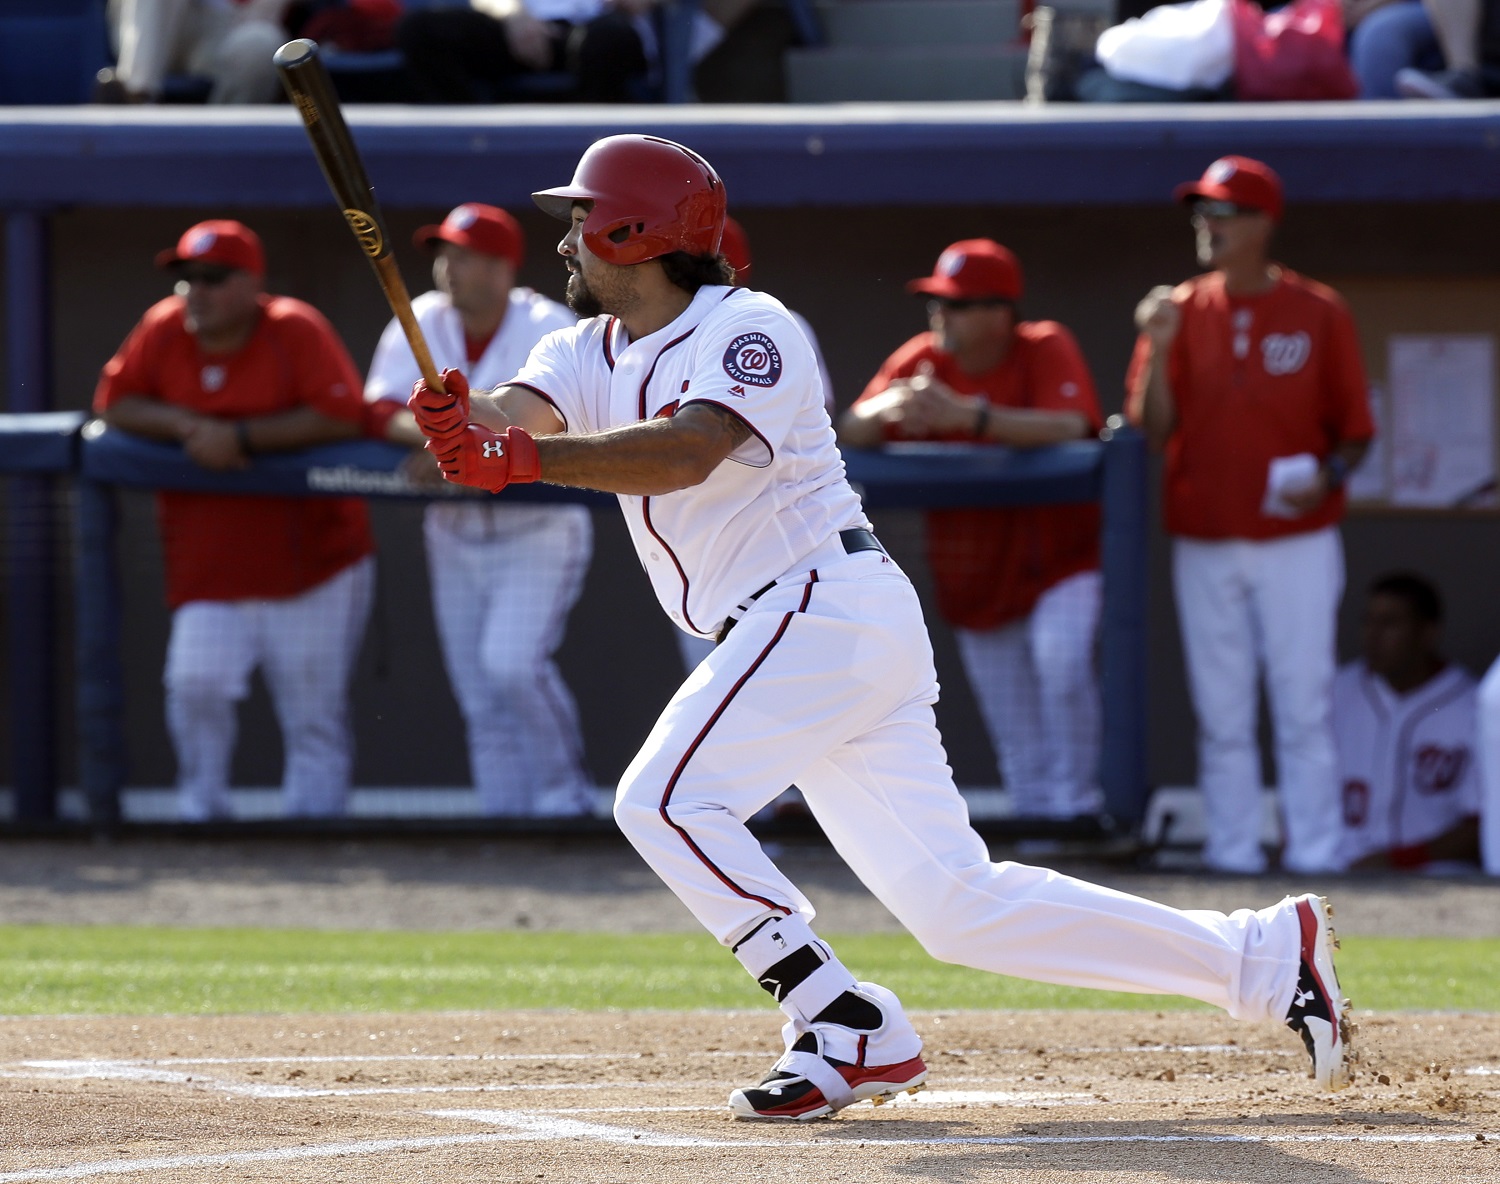 Washington Nationals' Anthony Rendon watches his double against the New York Yankees in the first inning of a spring training baseball game, Wednesday, March 23, 2016, in Viera, Fla. (AP Photo/John Raoux)